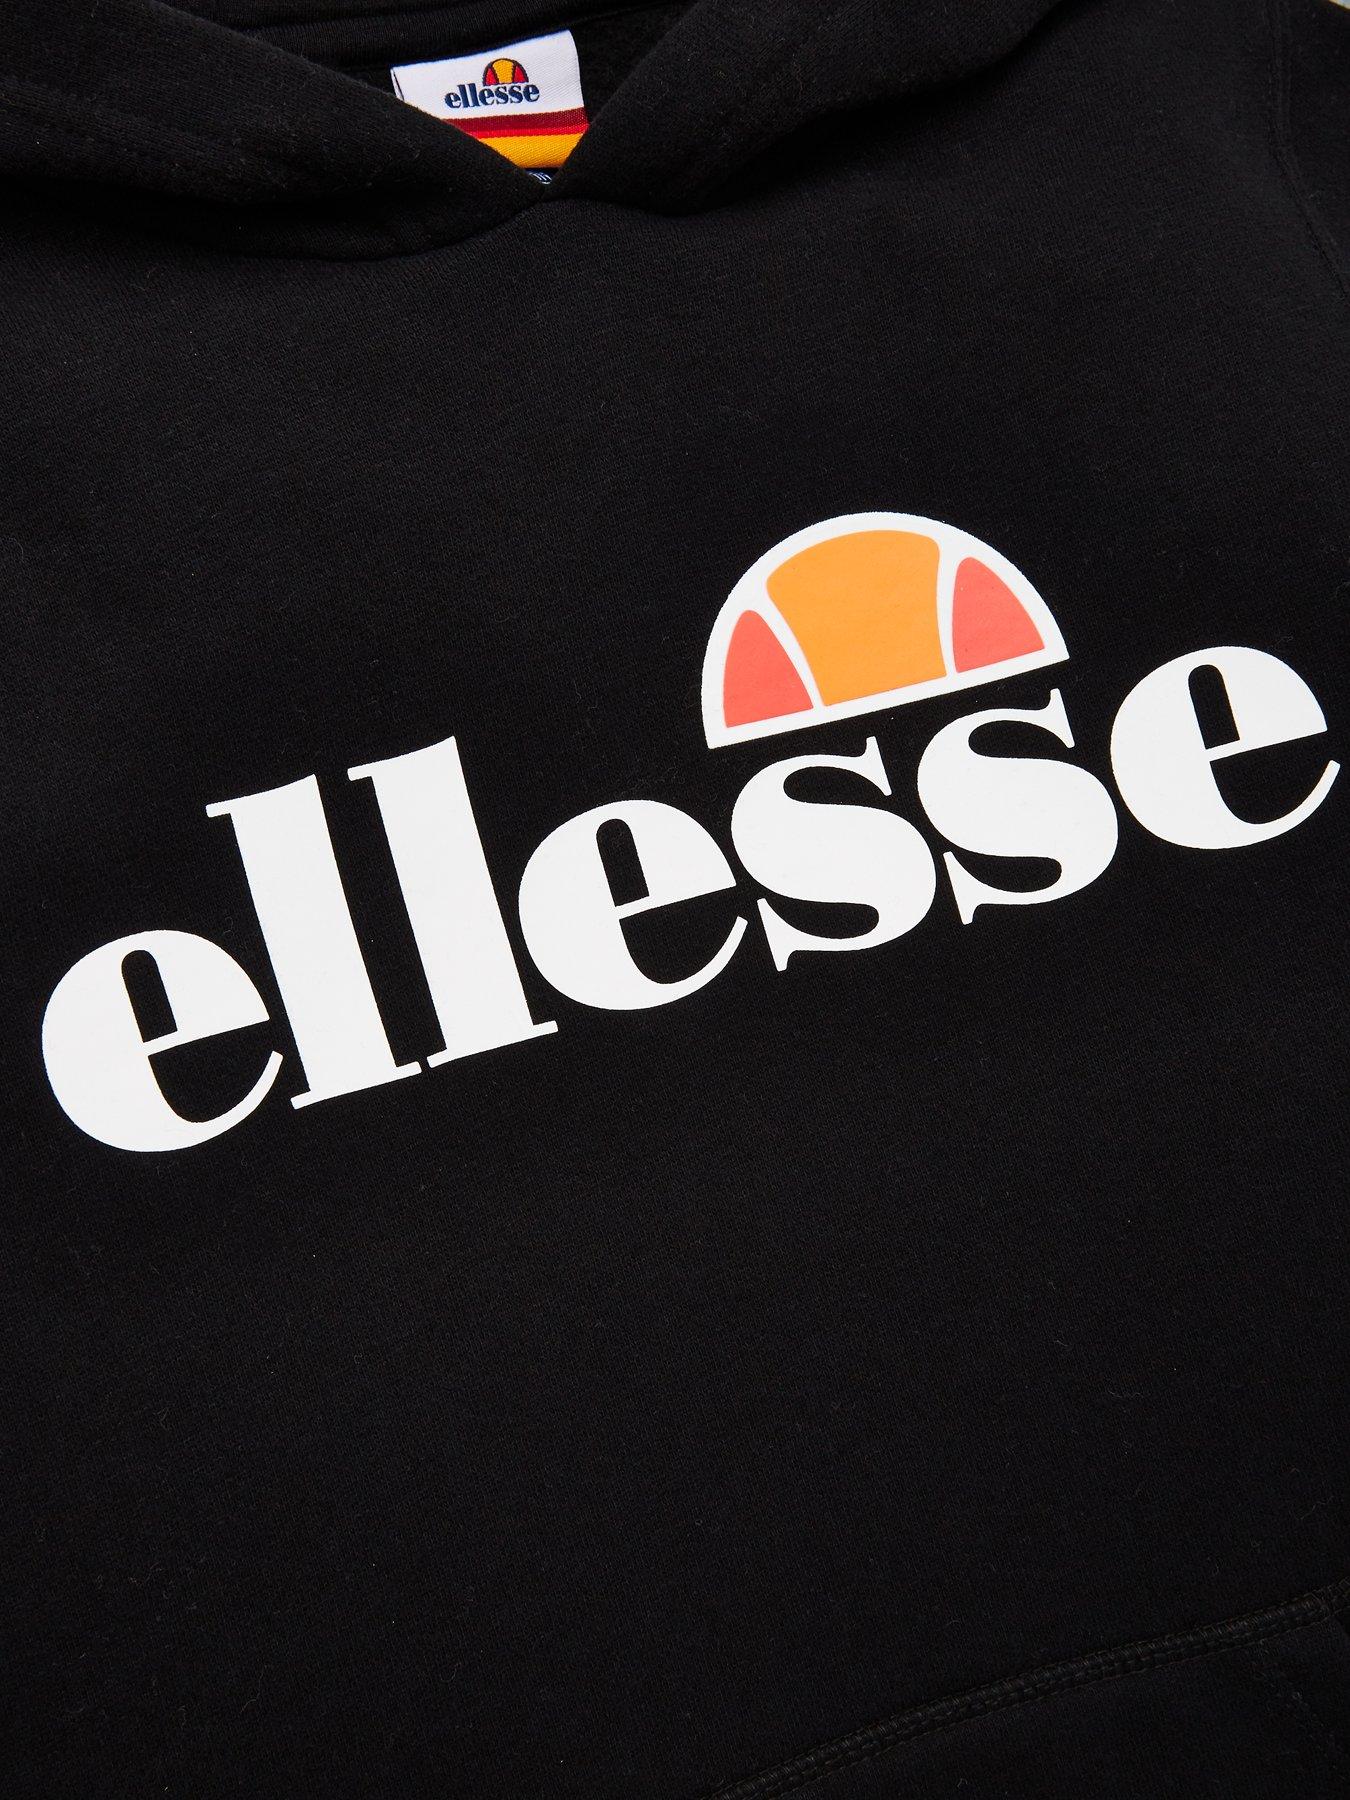 ellesse meaning in english